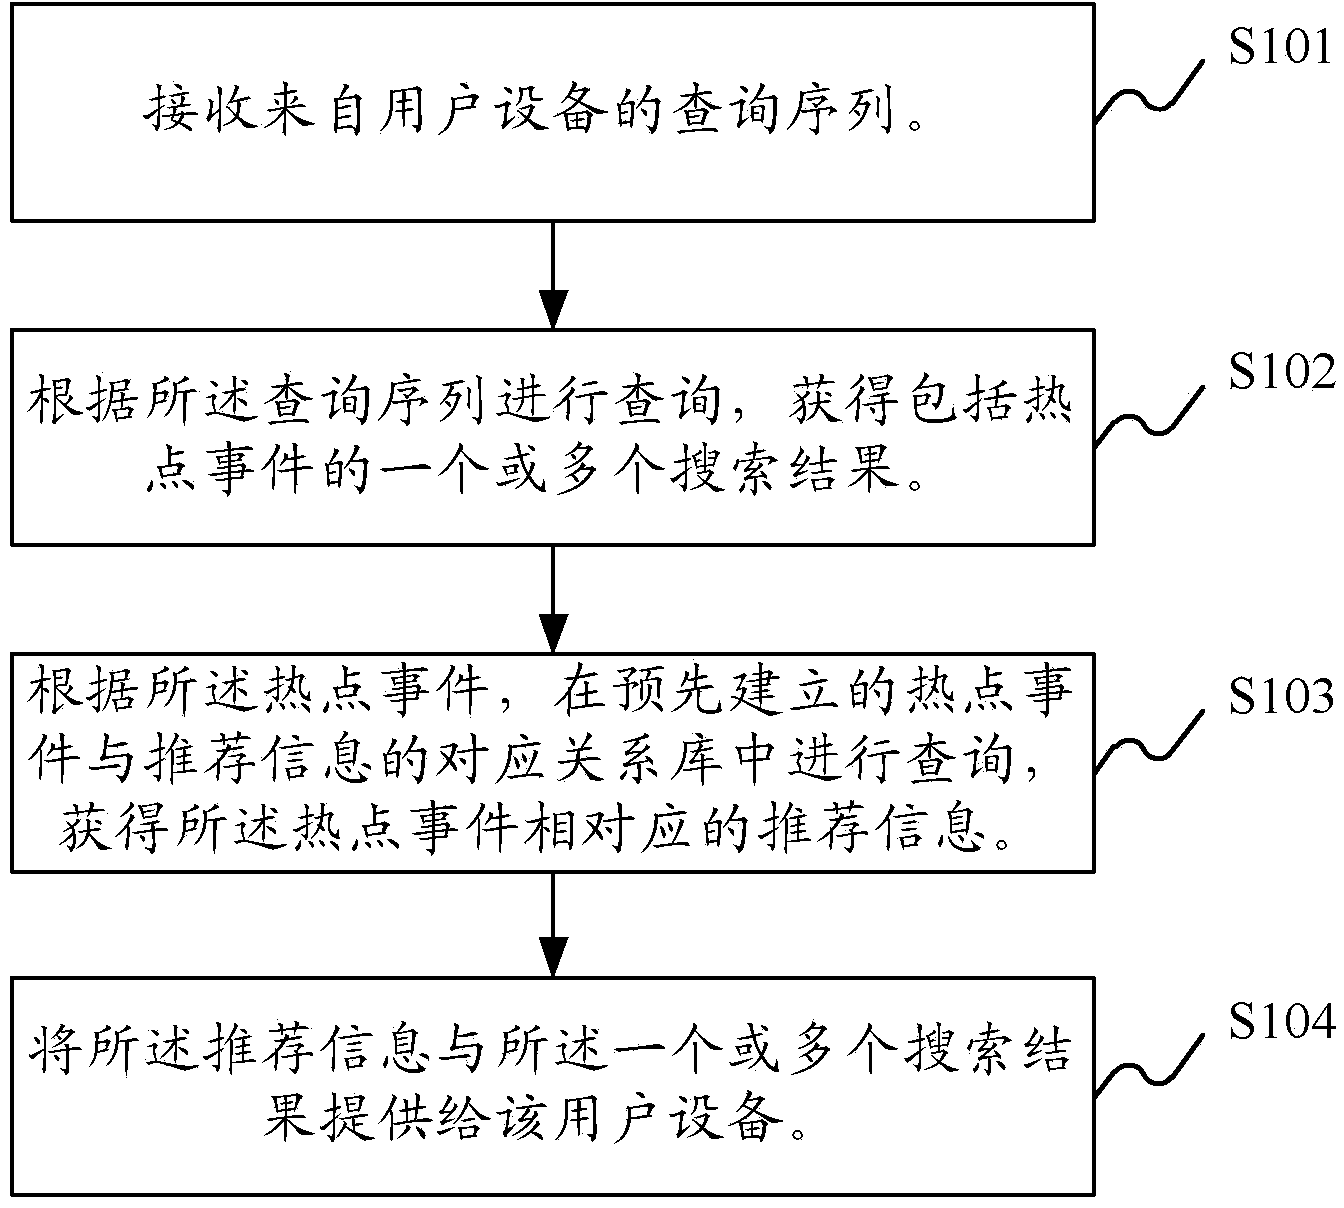 Method and system for providing recommended information on the basis of search results